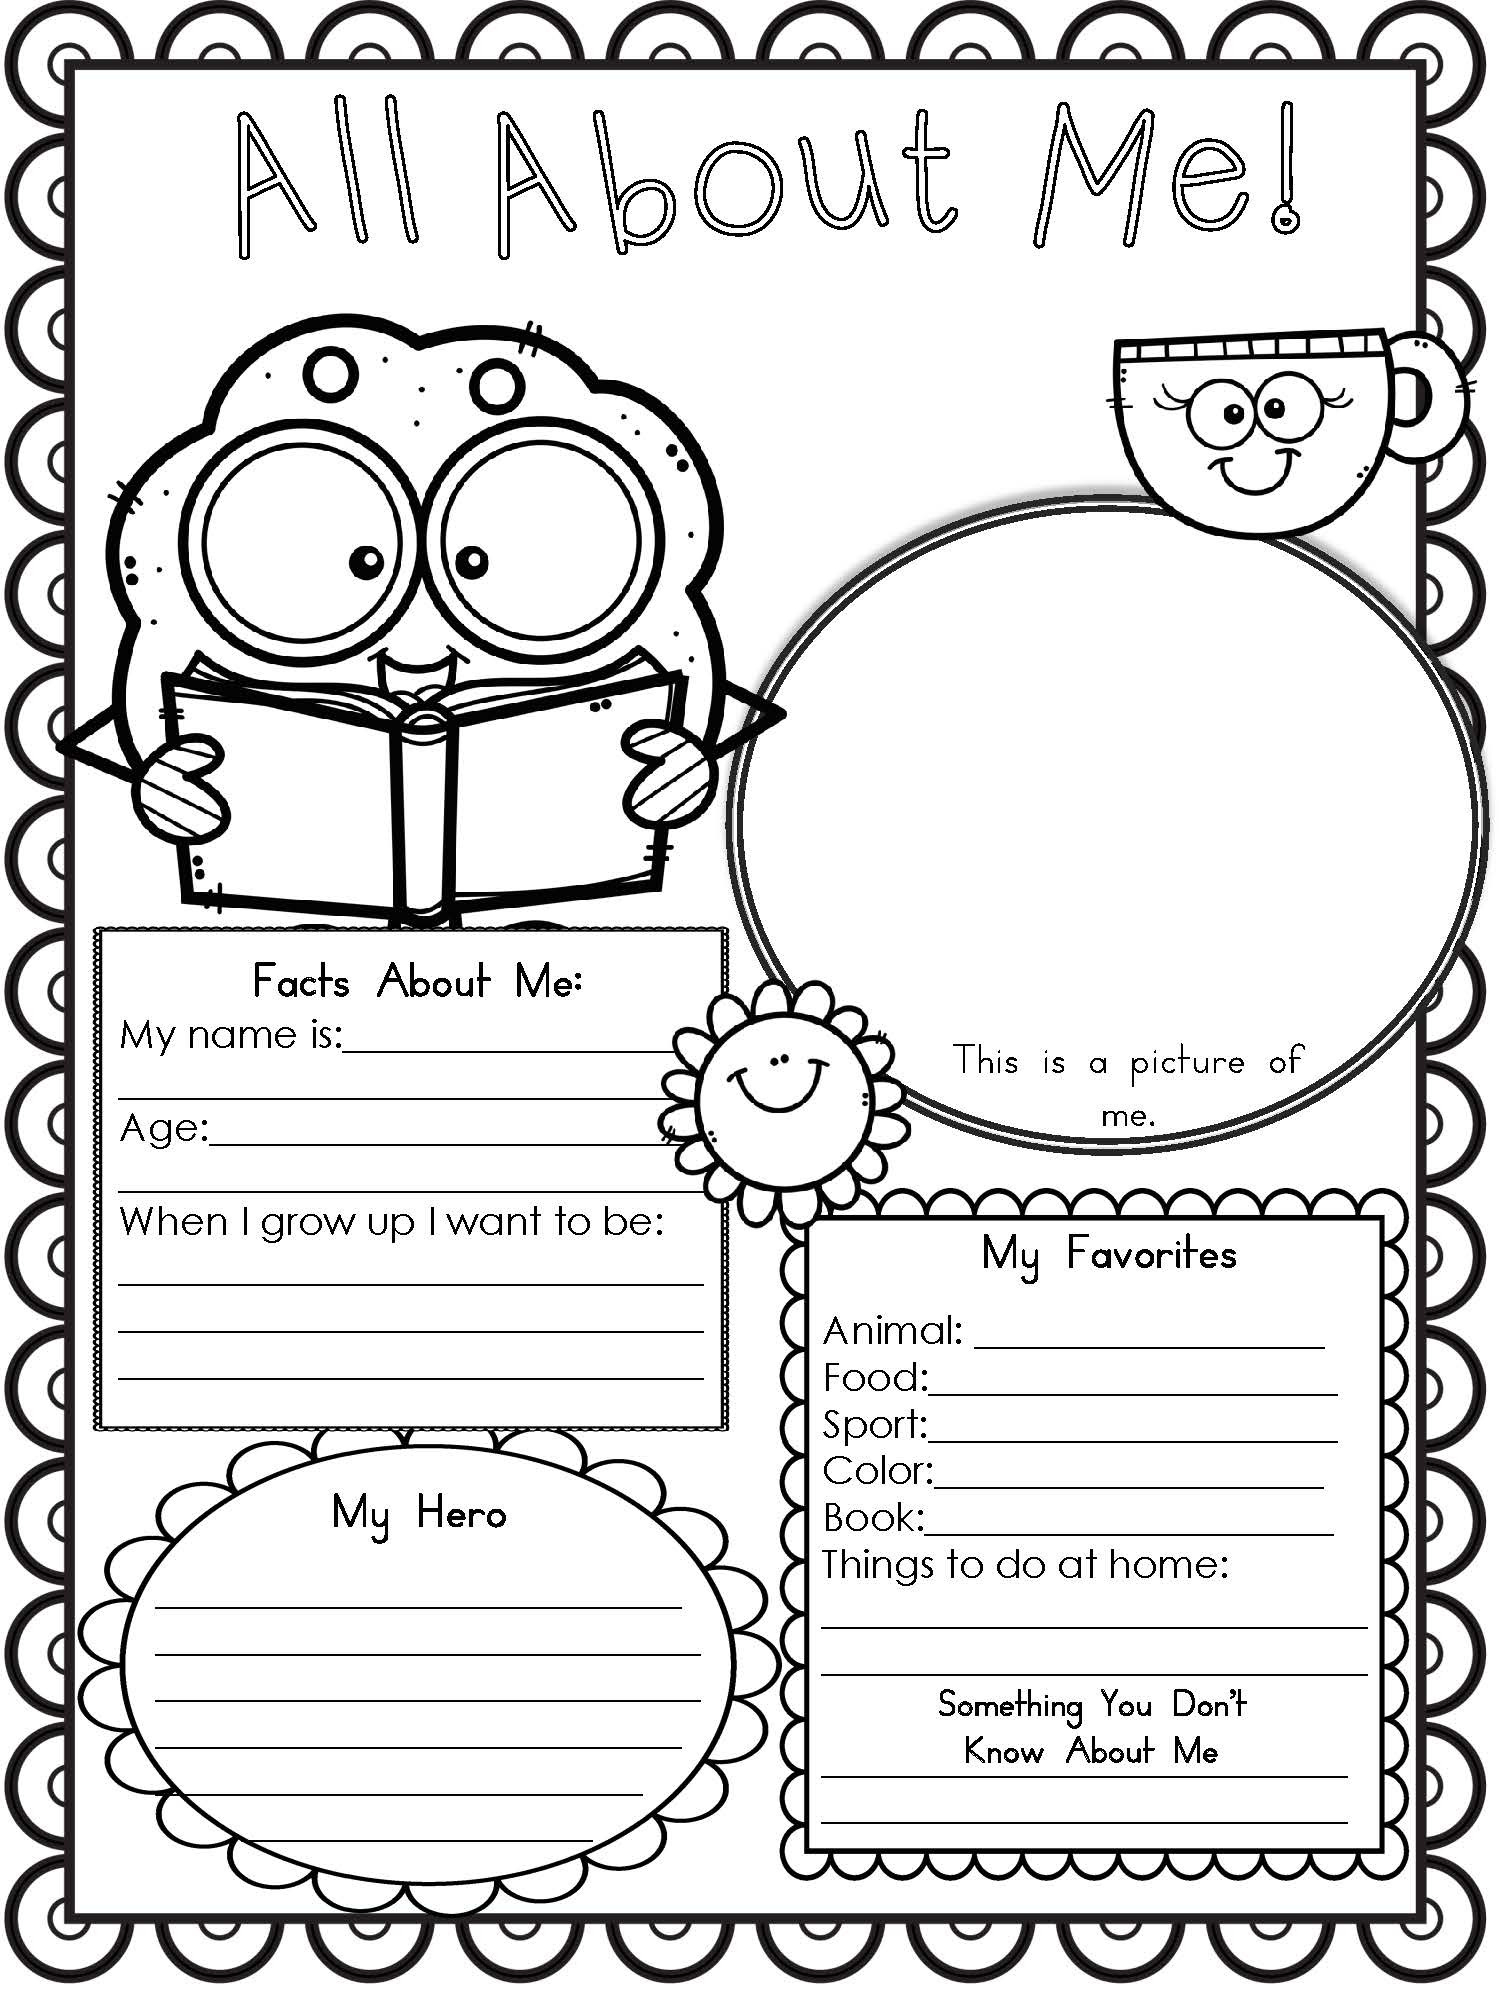 all-about-me-worksheet-middle-school-pdf-db-excel